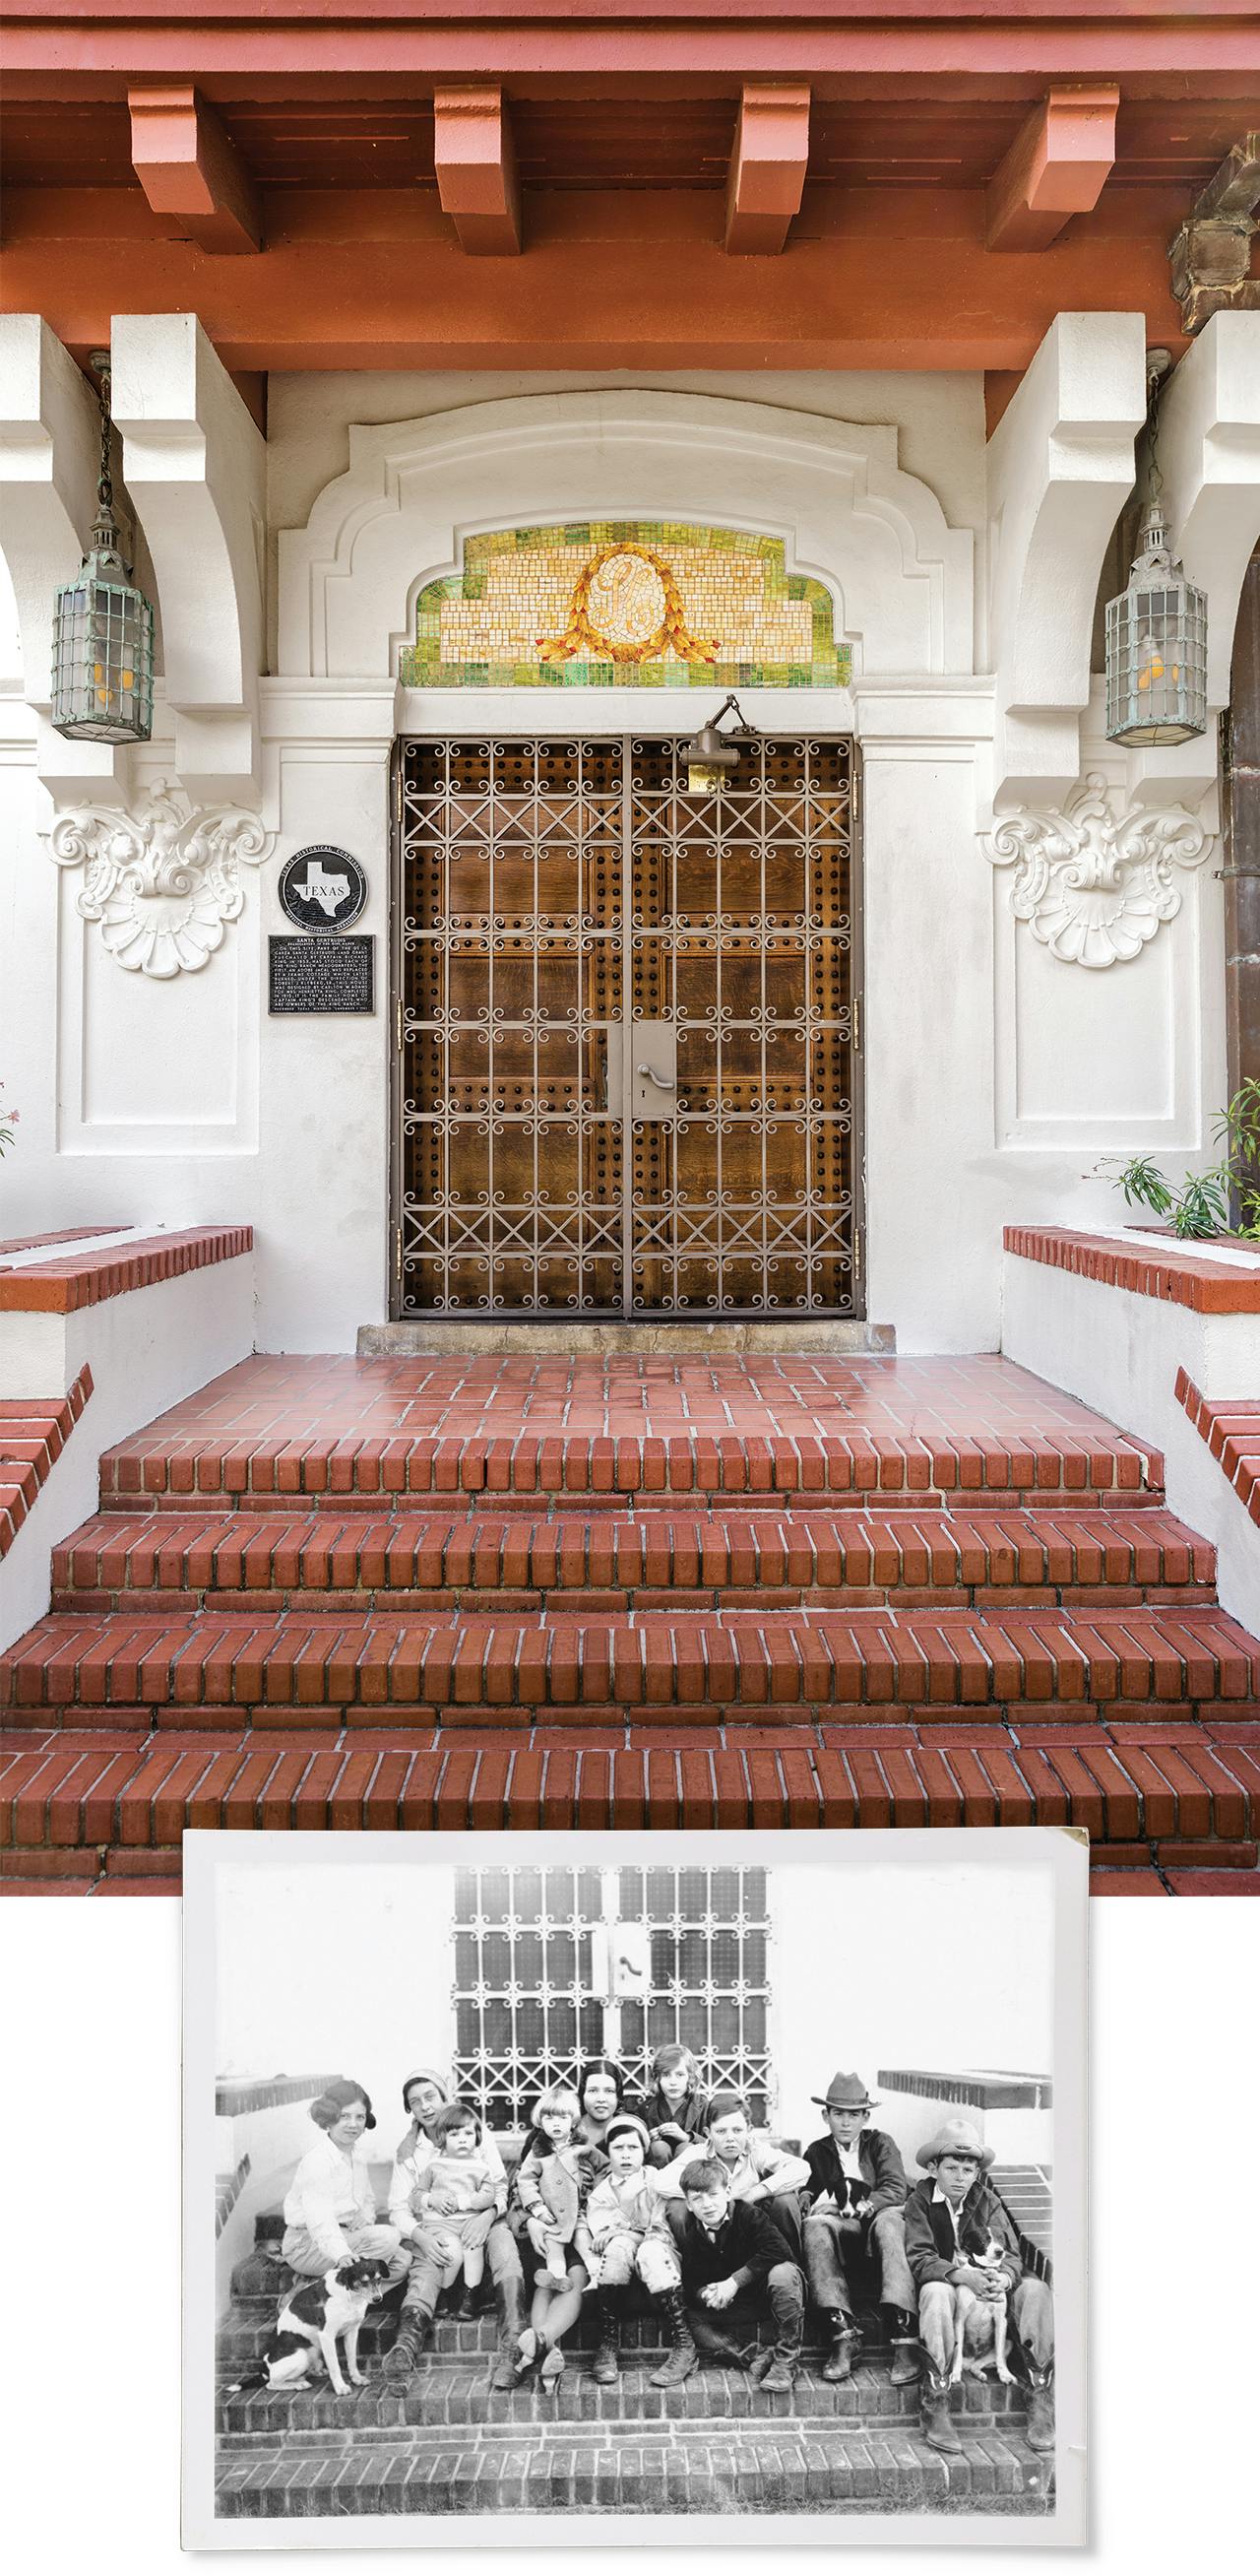 The north entrance to the house features art glass inlaid with the letter K above the door and an ornamental gate designed by Tiffany; the members of the King family sit outside that same north entrance in an undated photo.